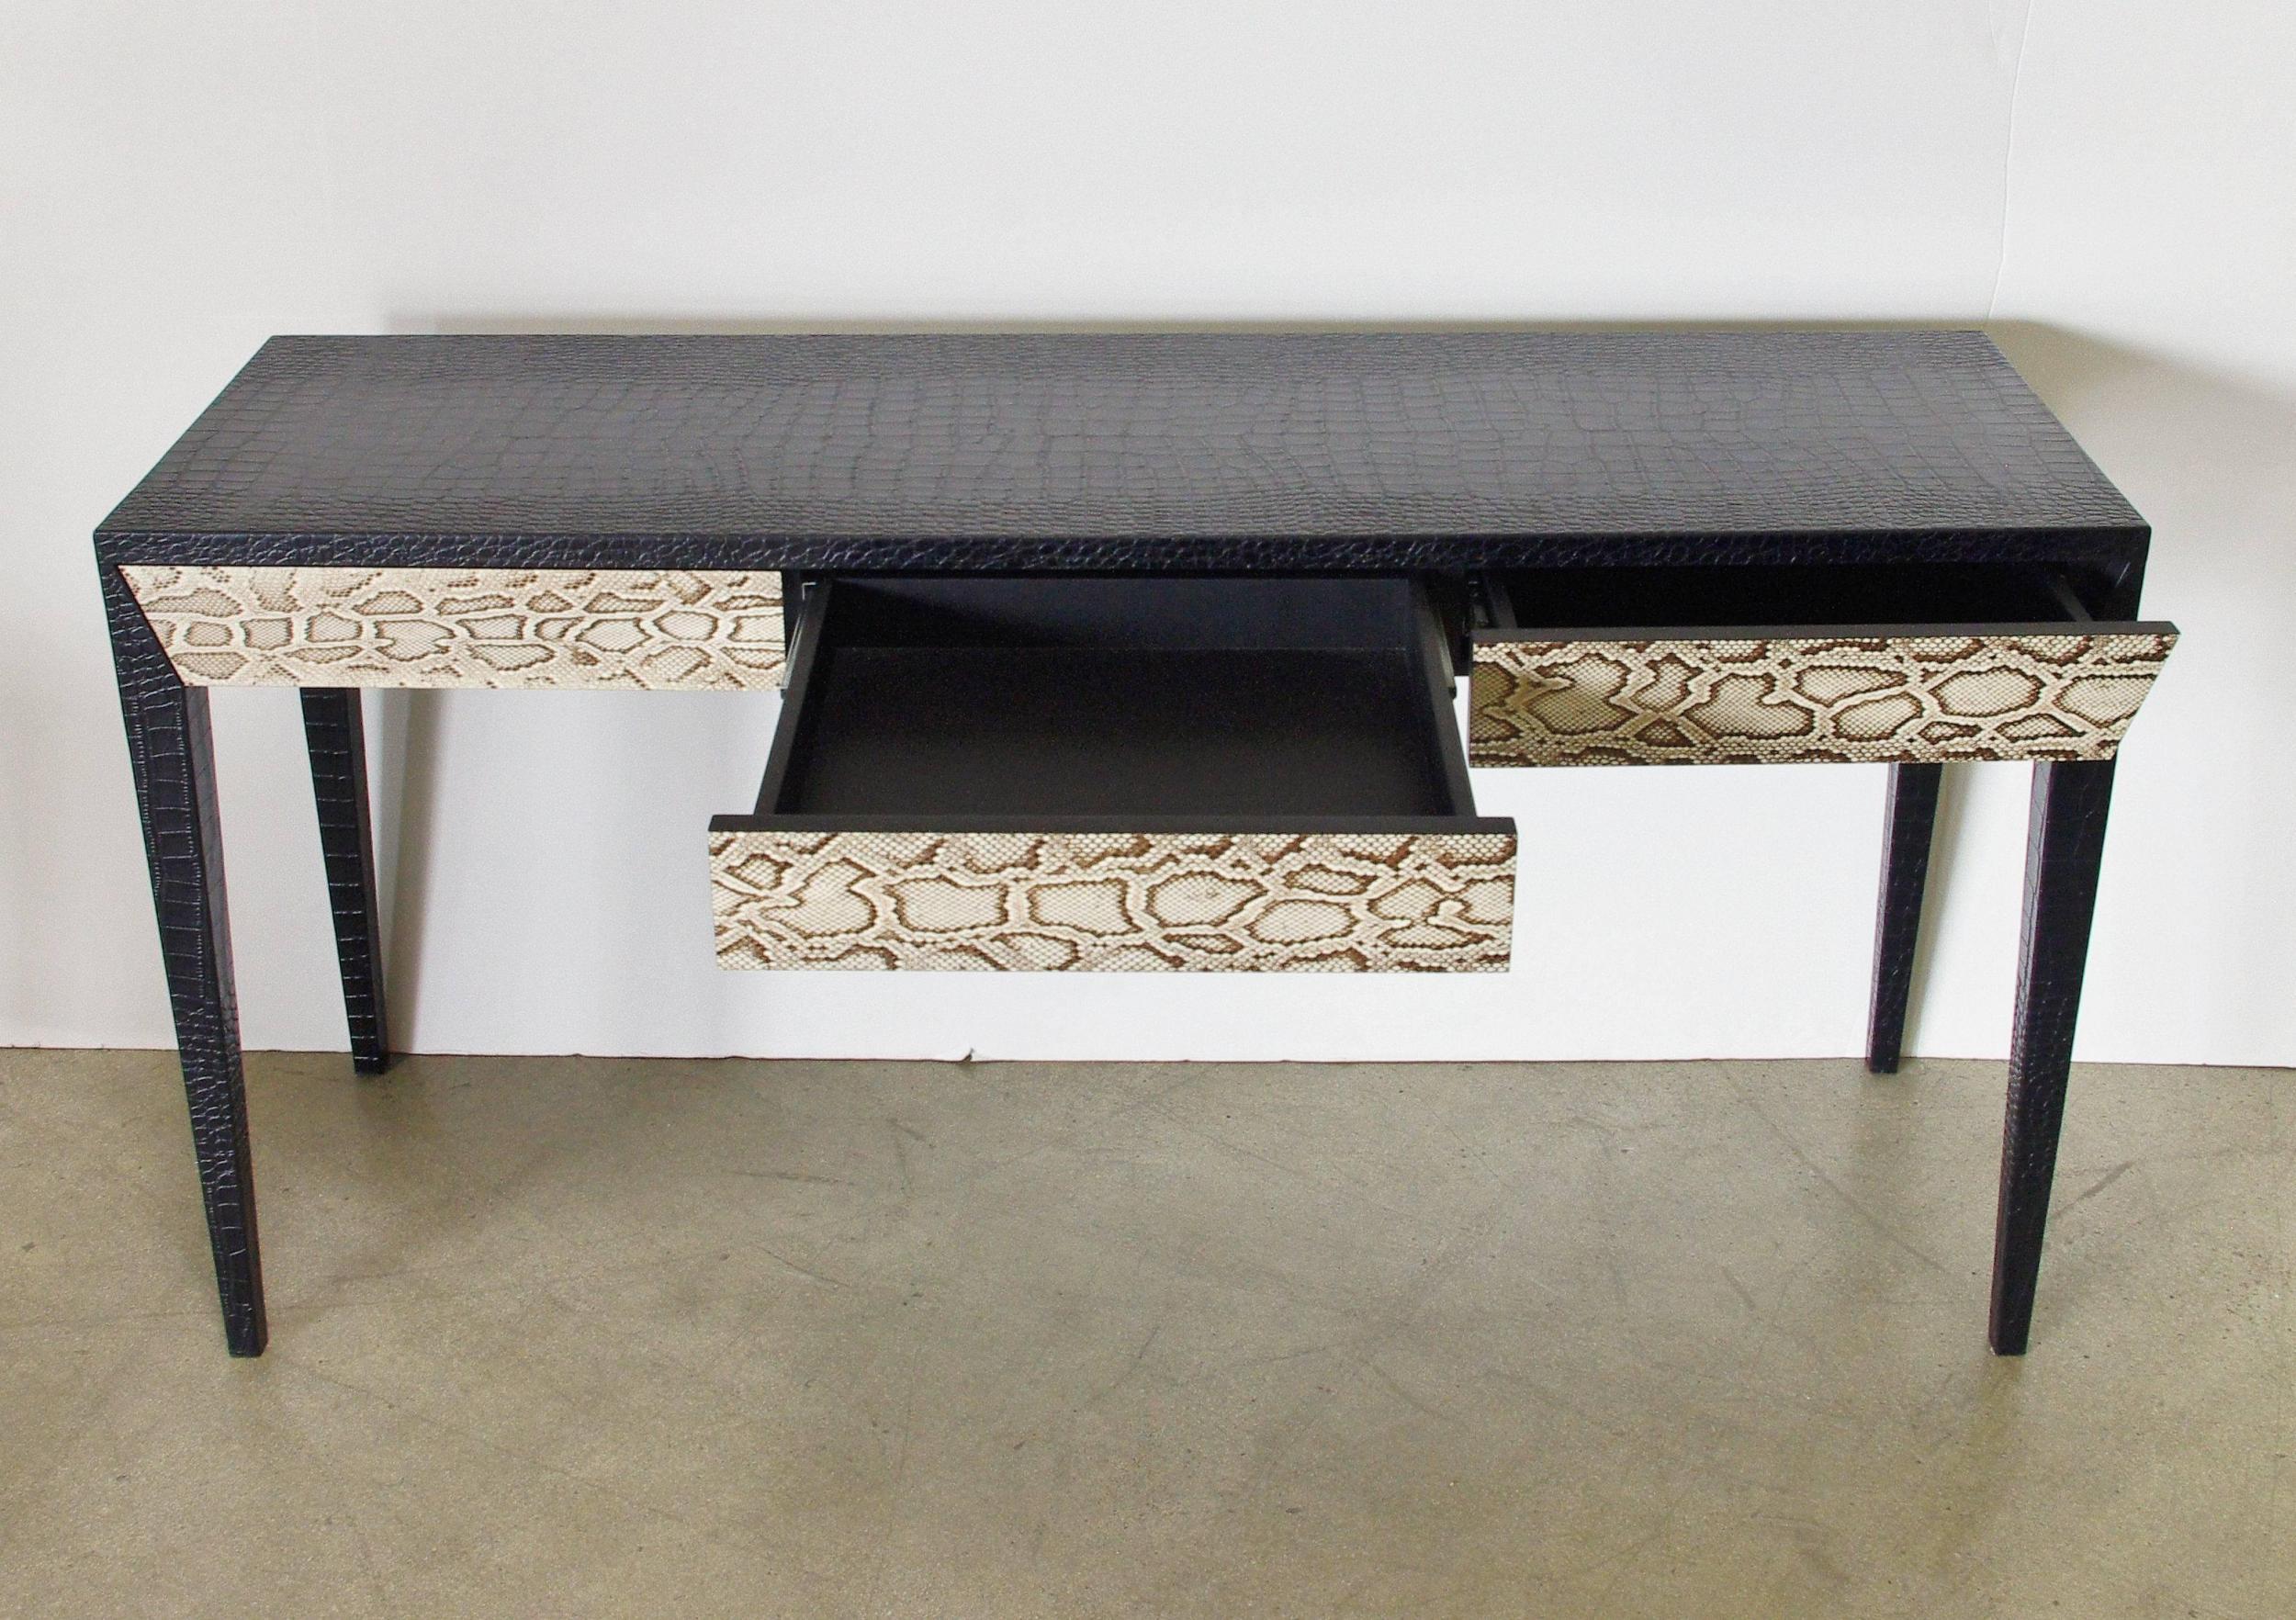 Italian Chic Console Table w/ Black Leather & Snake Skin Attrib. to Karl Springer, 1970s For Sale